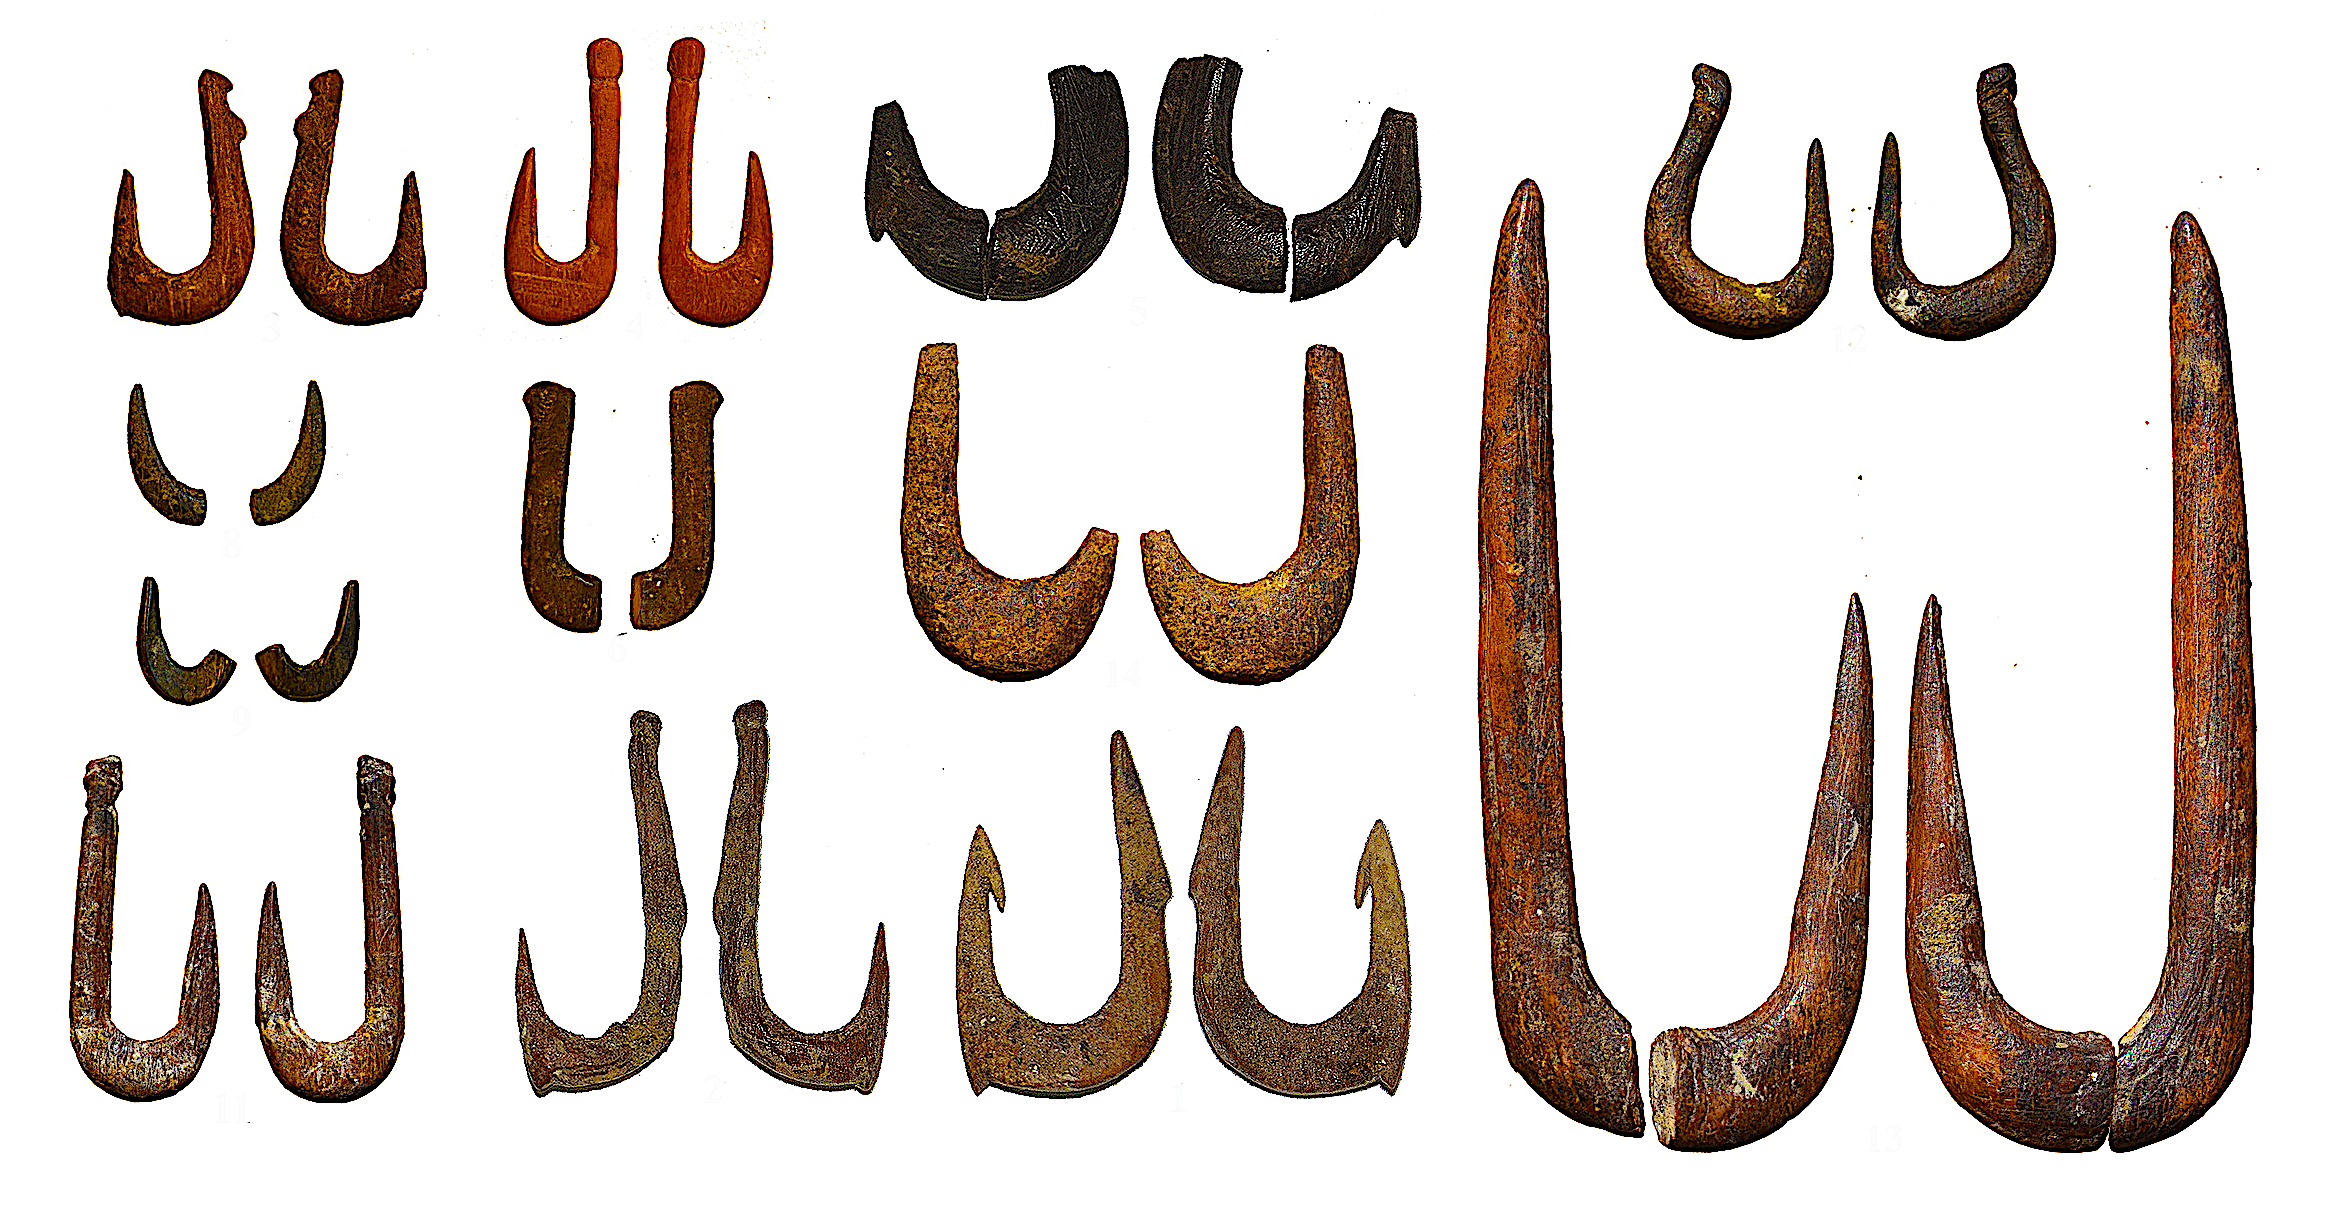 Fish hooks, from 12,000 years ago.